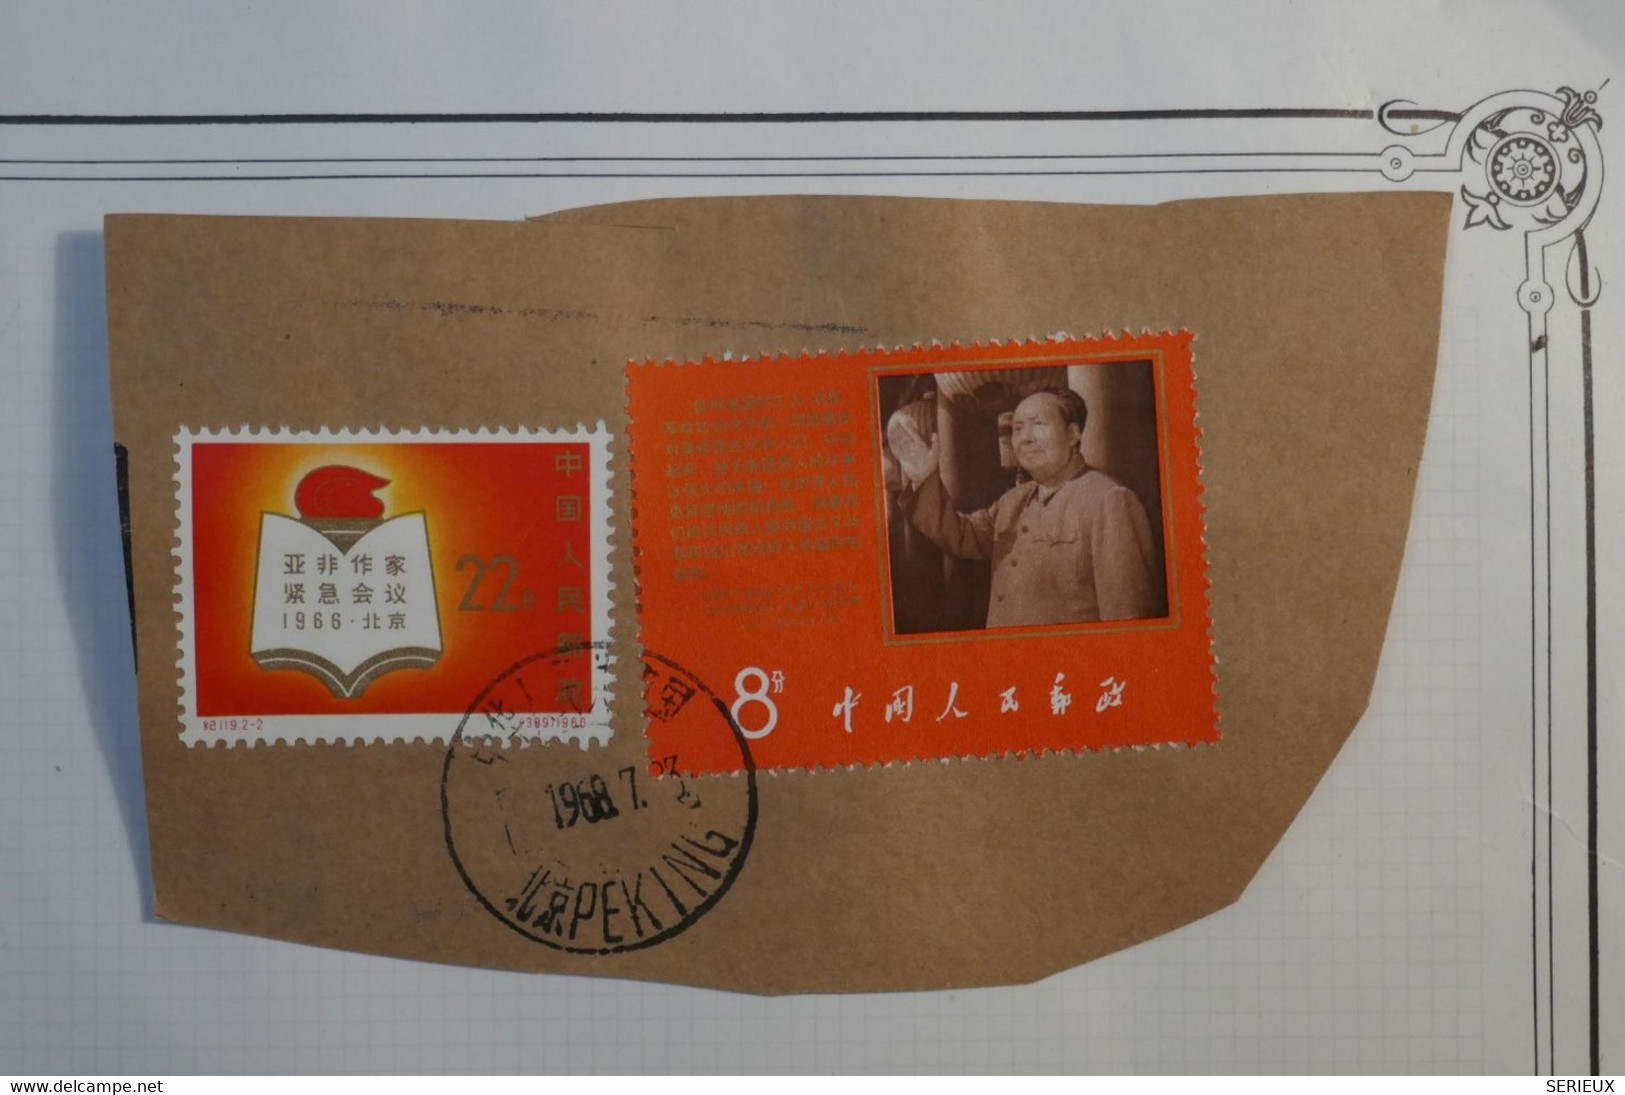 C CHINA  RARE STAMPS ON LETTER FRAGMENTS LUXE ++ 1968 PEKIN BEJIN TO FRANCE ++ + MAO + + PLEASANT  READABLE OBLITERATION - Briefe U. Dokumente